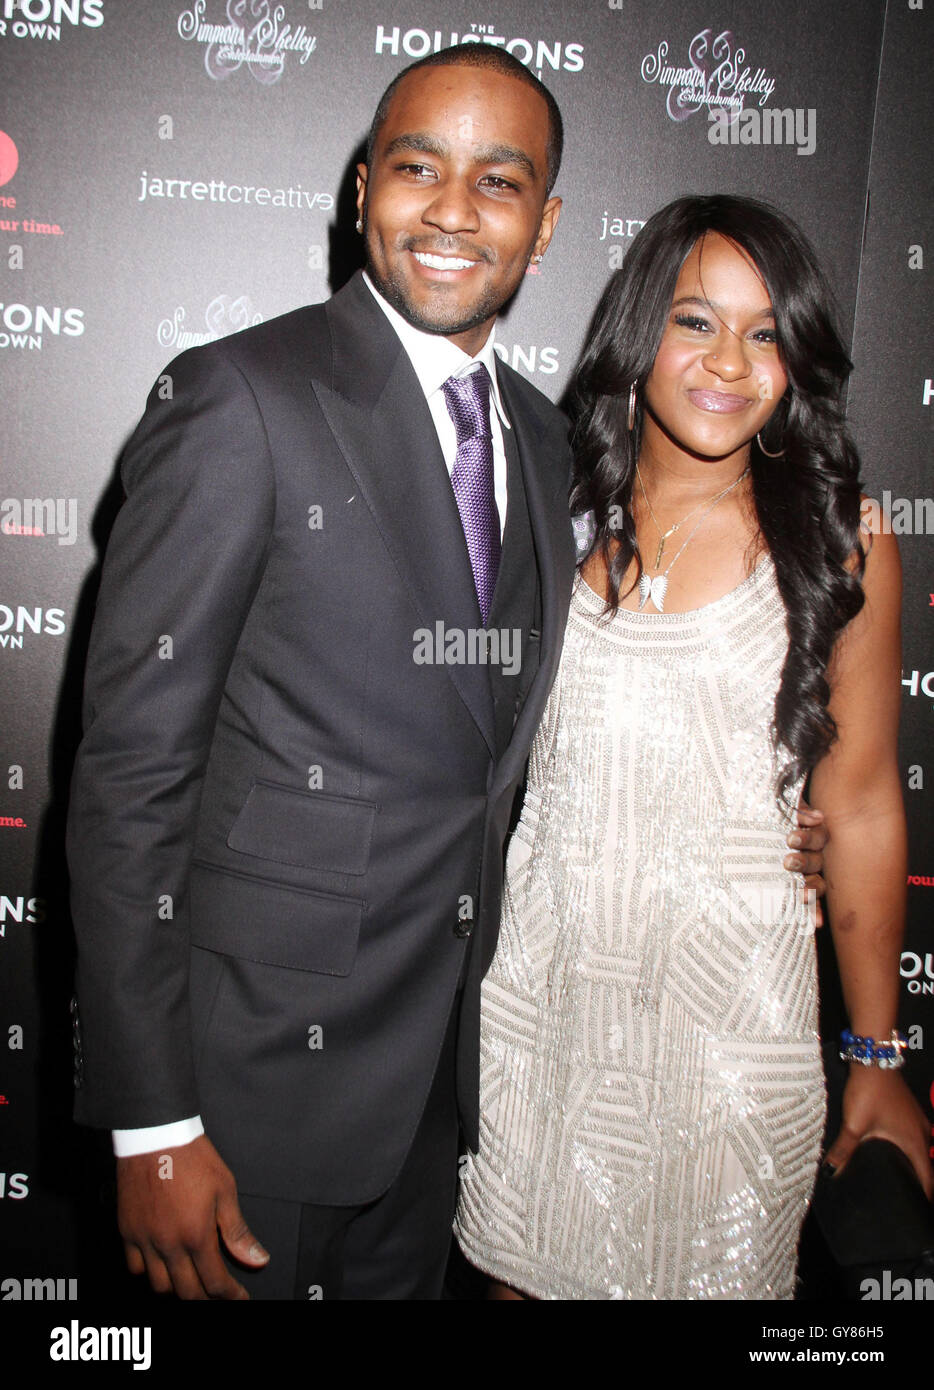 FILEPIX:  More than a year after the untimely death of BOBBI KRISTINA BROWN, a judge has found her boyfriend, Nick Gordon, 'legally responsible' for her death. Brown's estate filed a wrongful death lawsuit against Gordon, accusing him of assault, battery, and intentionally causing her emotional harm. Gordon failed to appear in court twice in the case, so the judge said anything the Brown estate claimed is admitted through omission. The Browns wanted $50 million in damages, but a jury will ultimately decide how much Gordon will have to pay. Gordon has not been charged with any © ZUM © ZUMA Pres Stock Photo